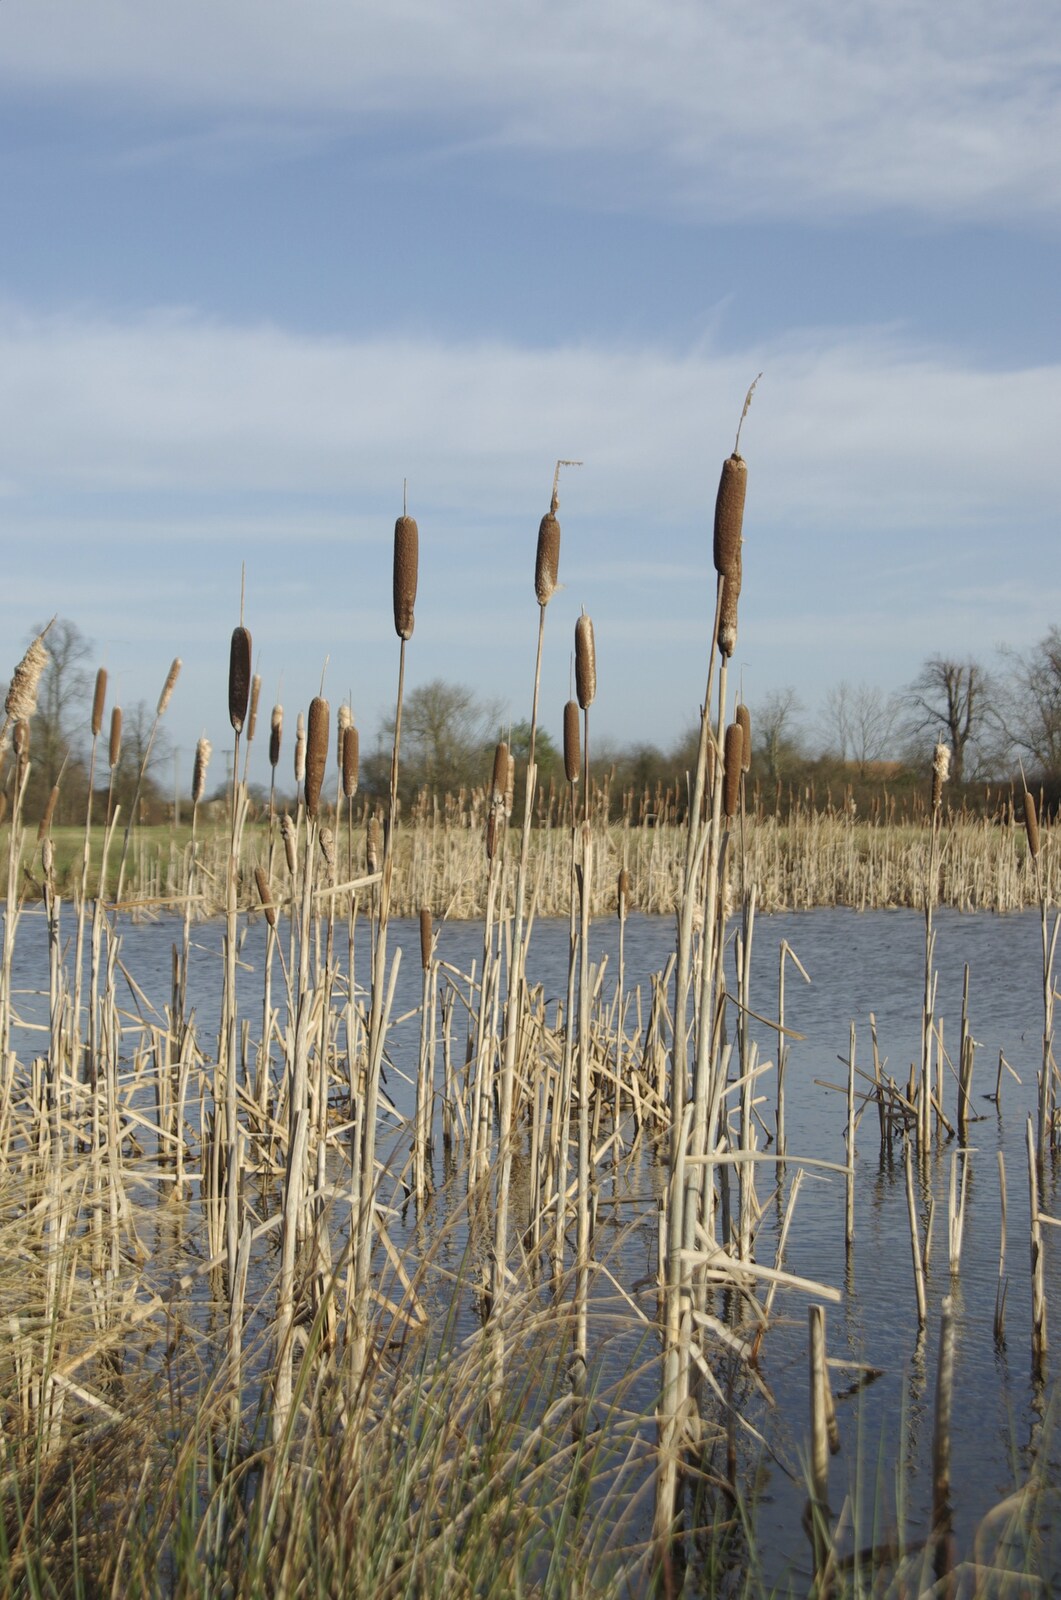 Bullrushes at Mellis Common from Park Life: The Green Room with The BBs, Park Hotel, Diss - 13th January 2007